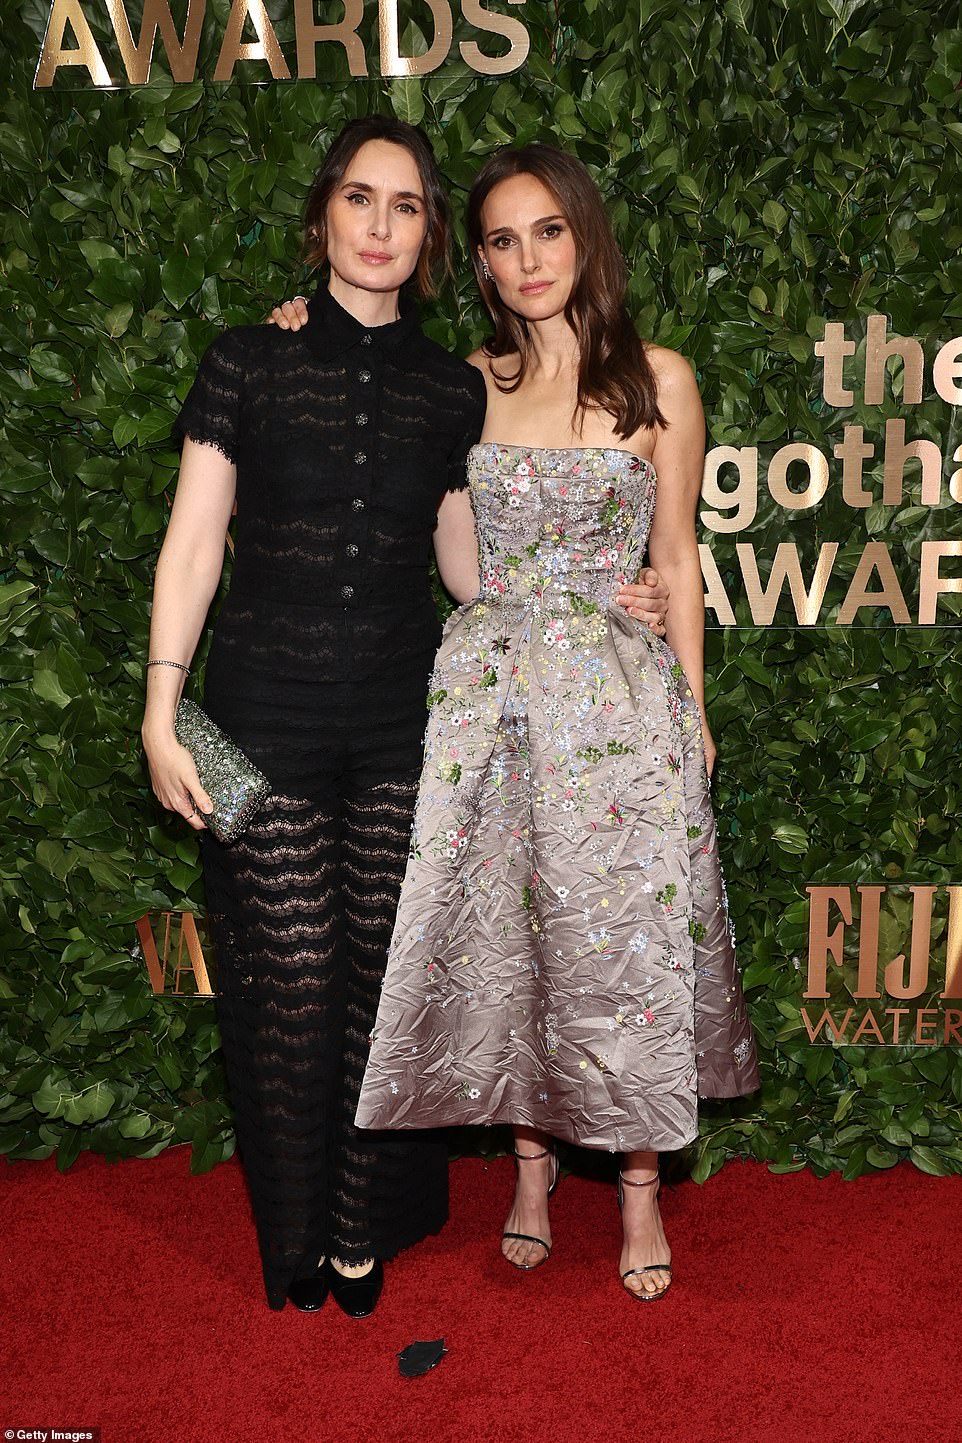 Colleagues: Portman posed for a snap with Sophie Mas, who co-founded the MountainA production company alongside the Black Swan star